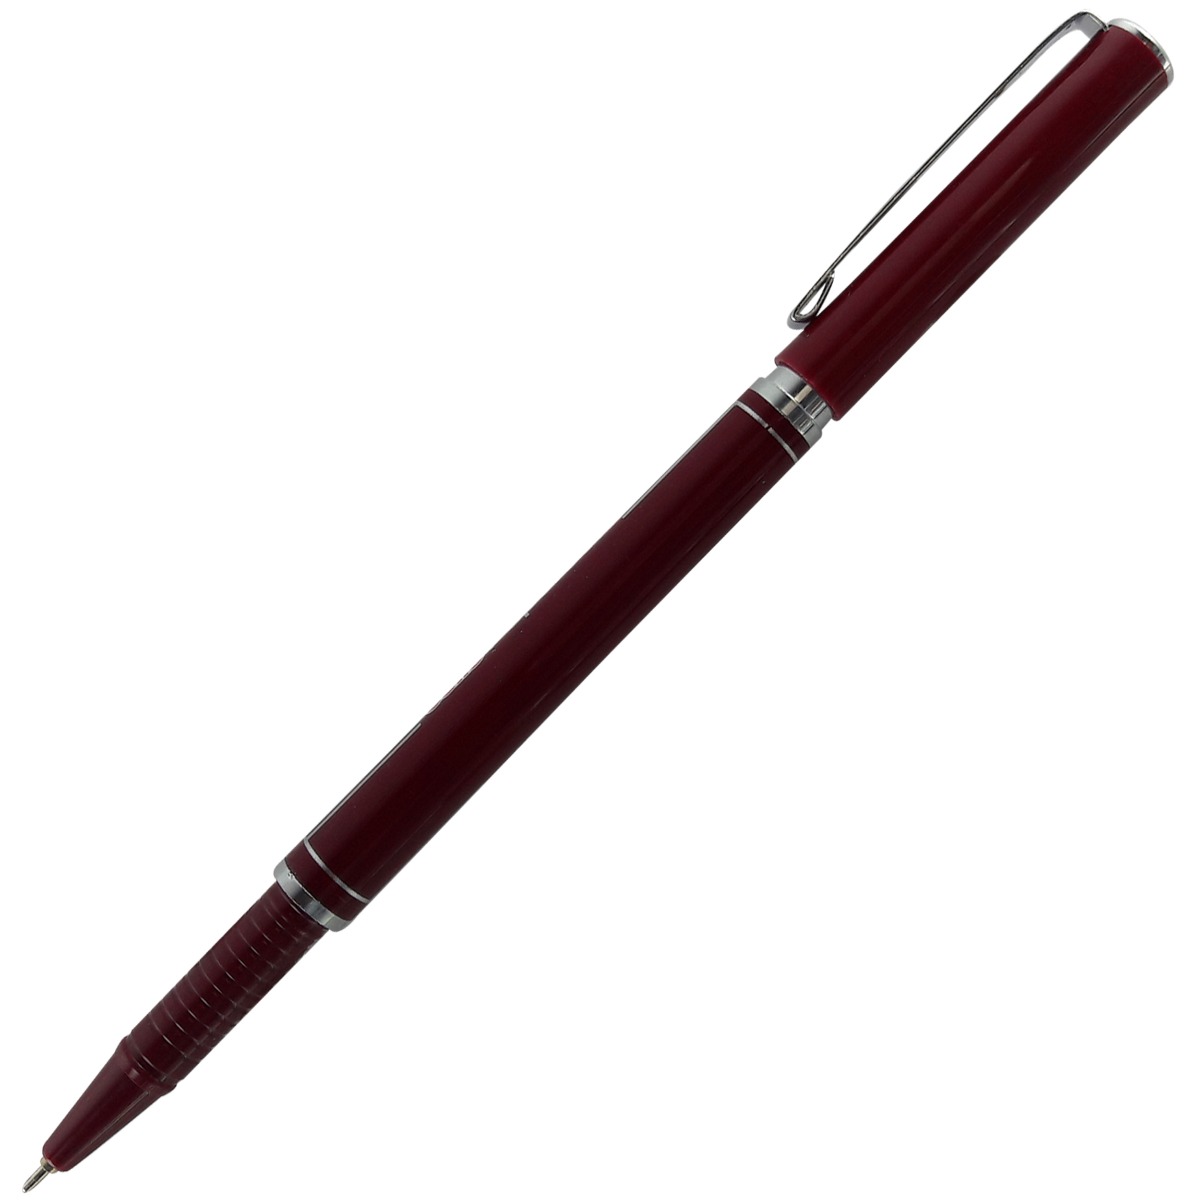 CELLO PAPERSOFT – RED BODY SLIM TYPE GEL PEN MODEL:12443